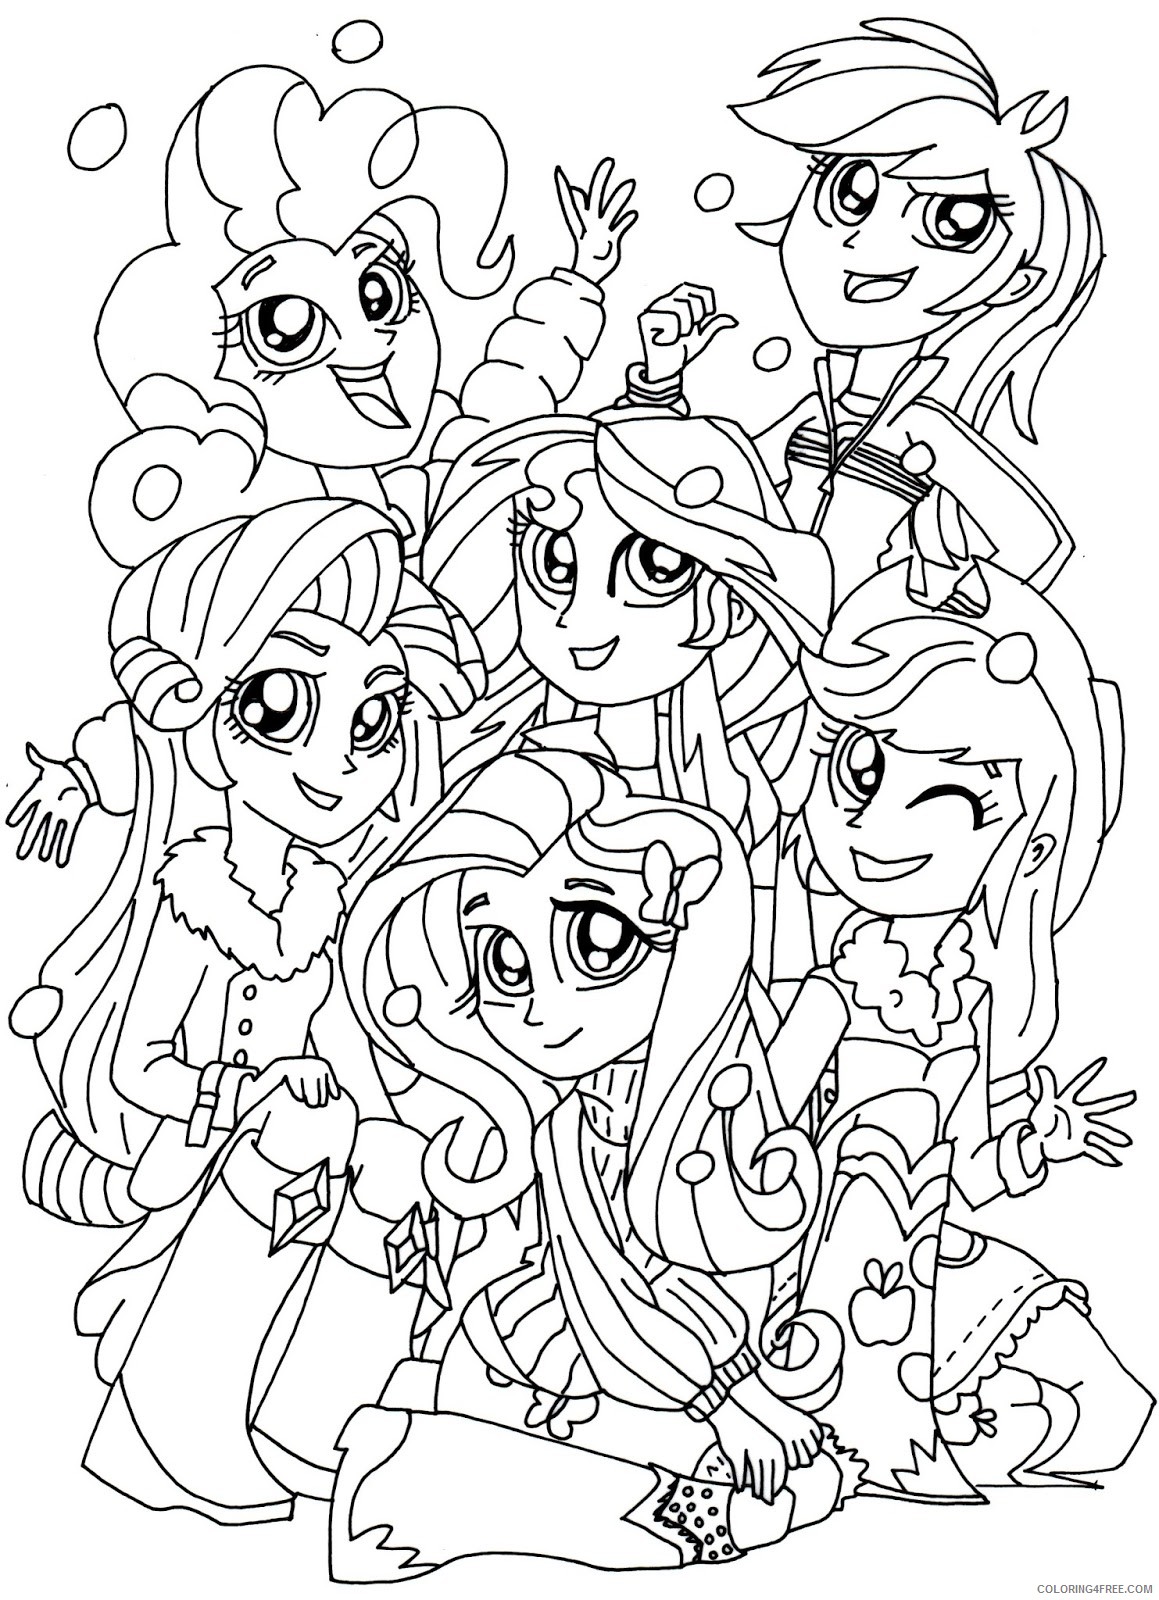 My Little Pony Equestria Girls Coloring Pages Cartoons Equestria Girls Printable 2020 4603 Coloring4free